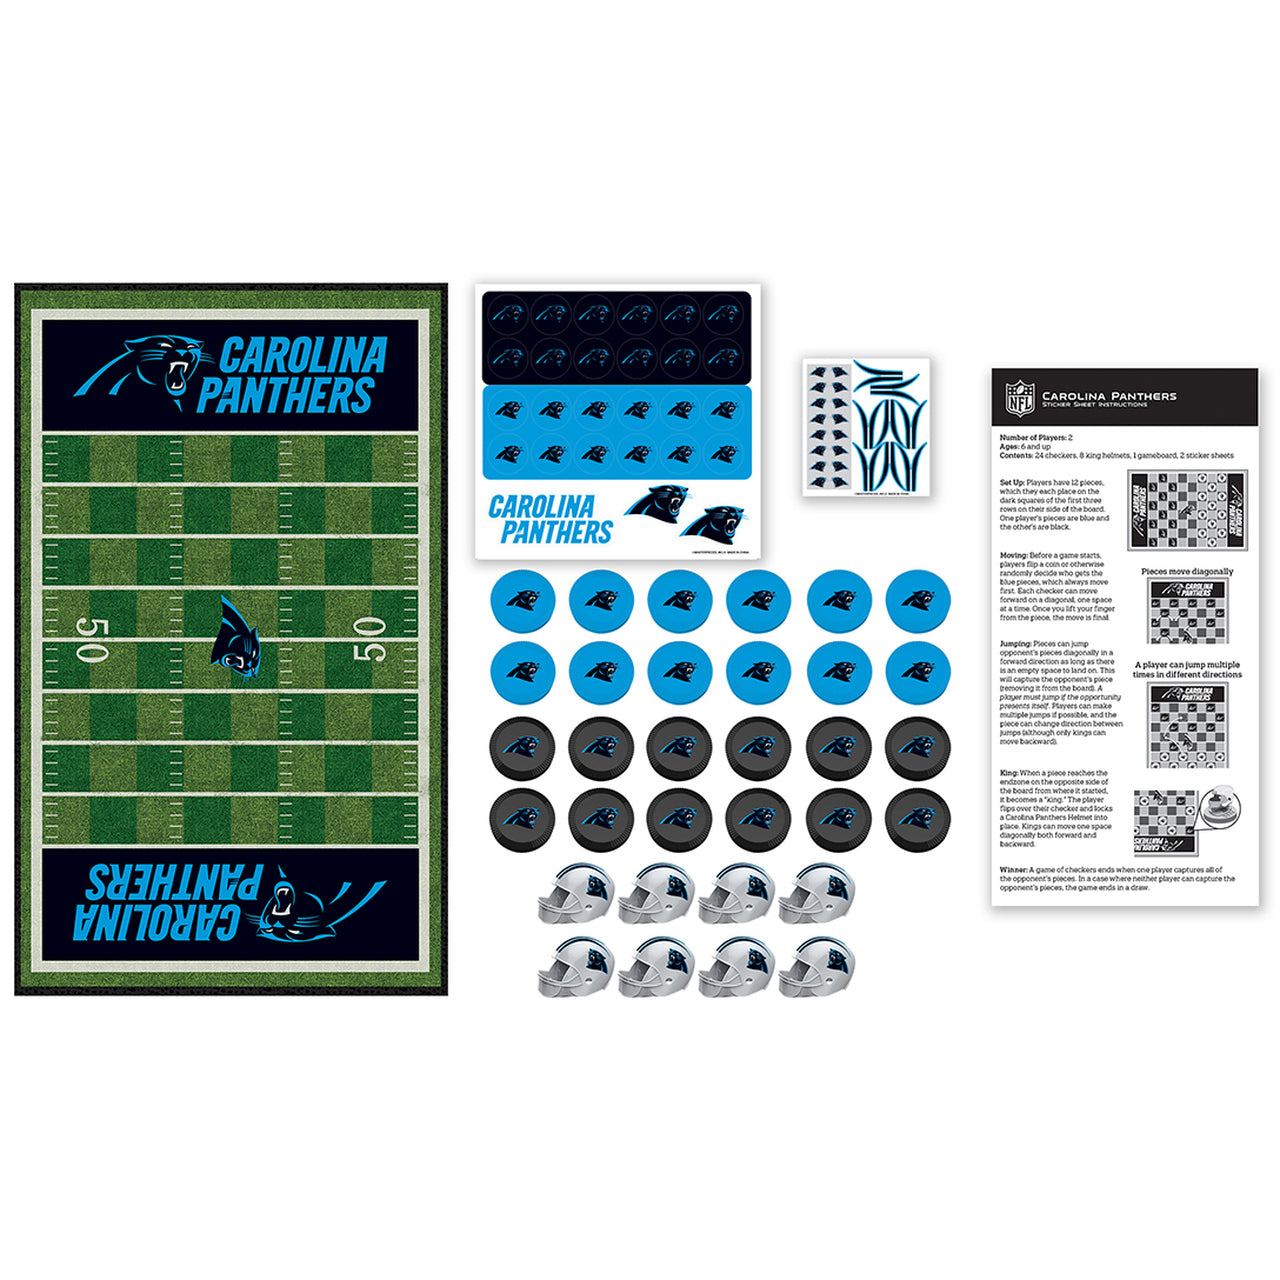 Carolina Panthers Checkers Board Game by Masterpieces